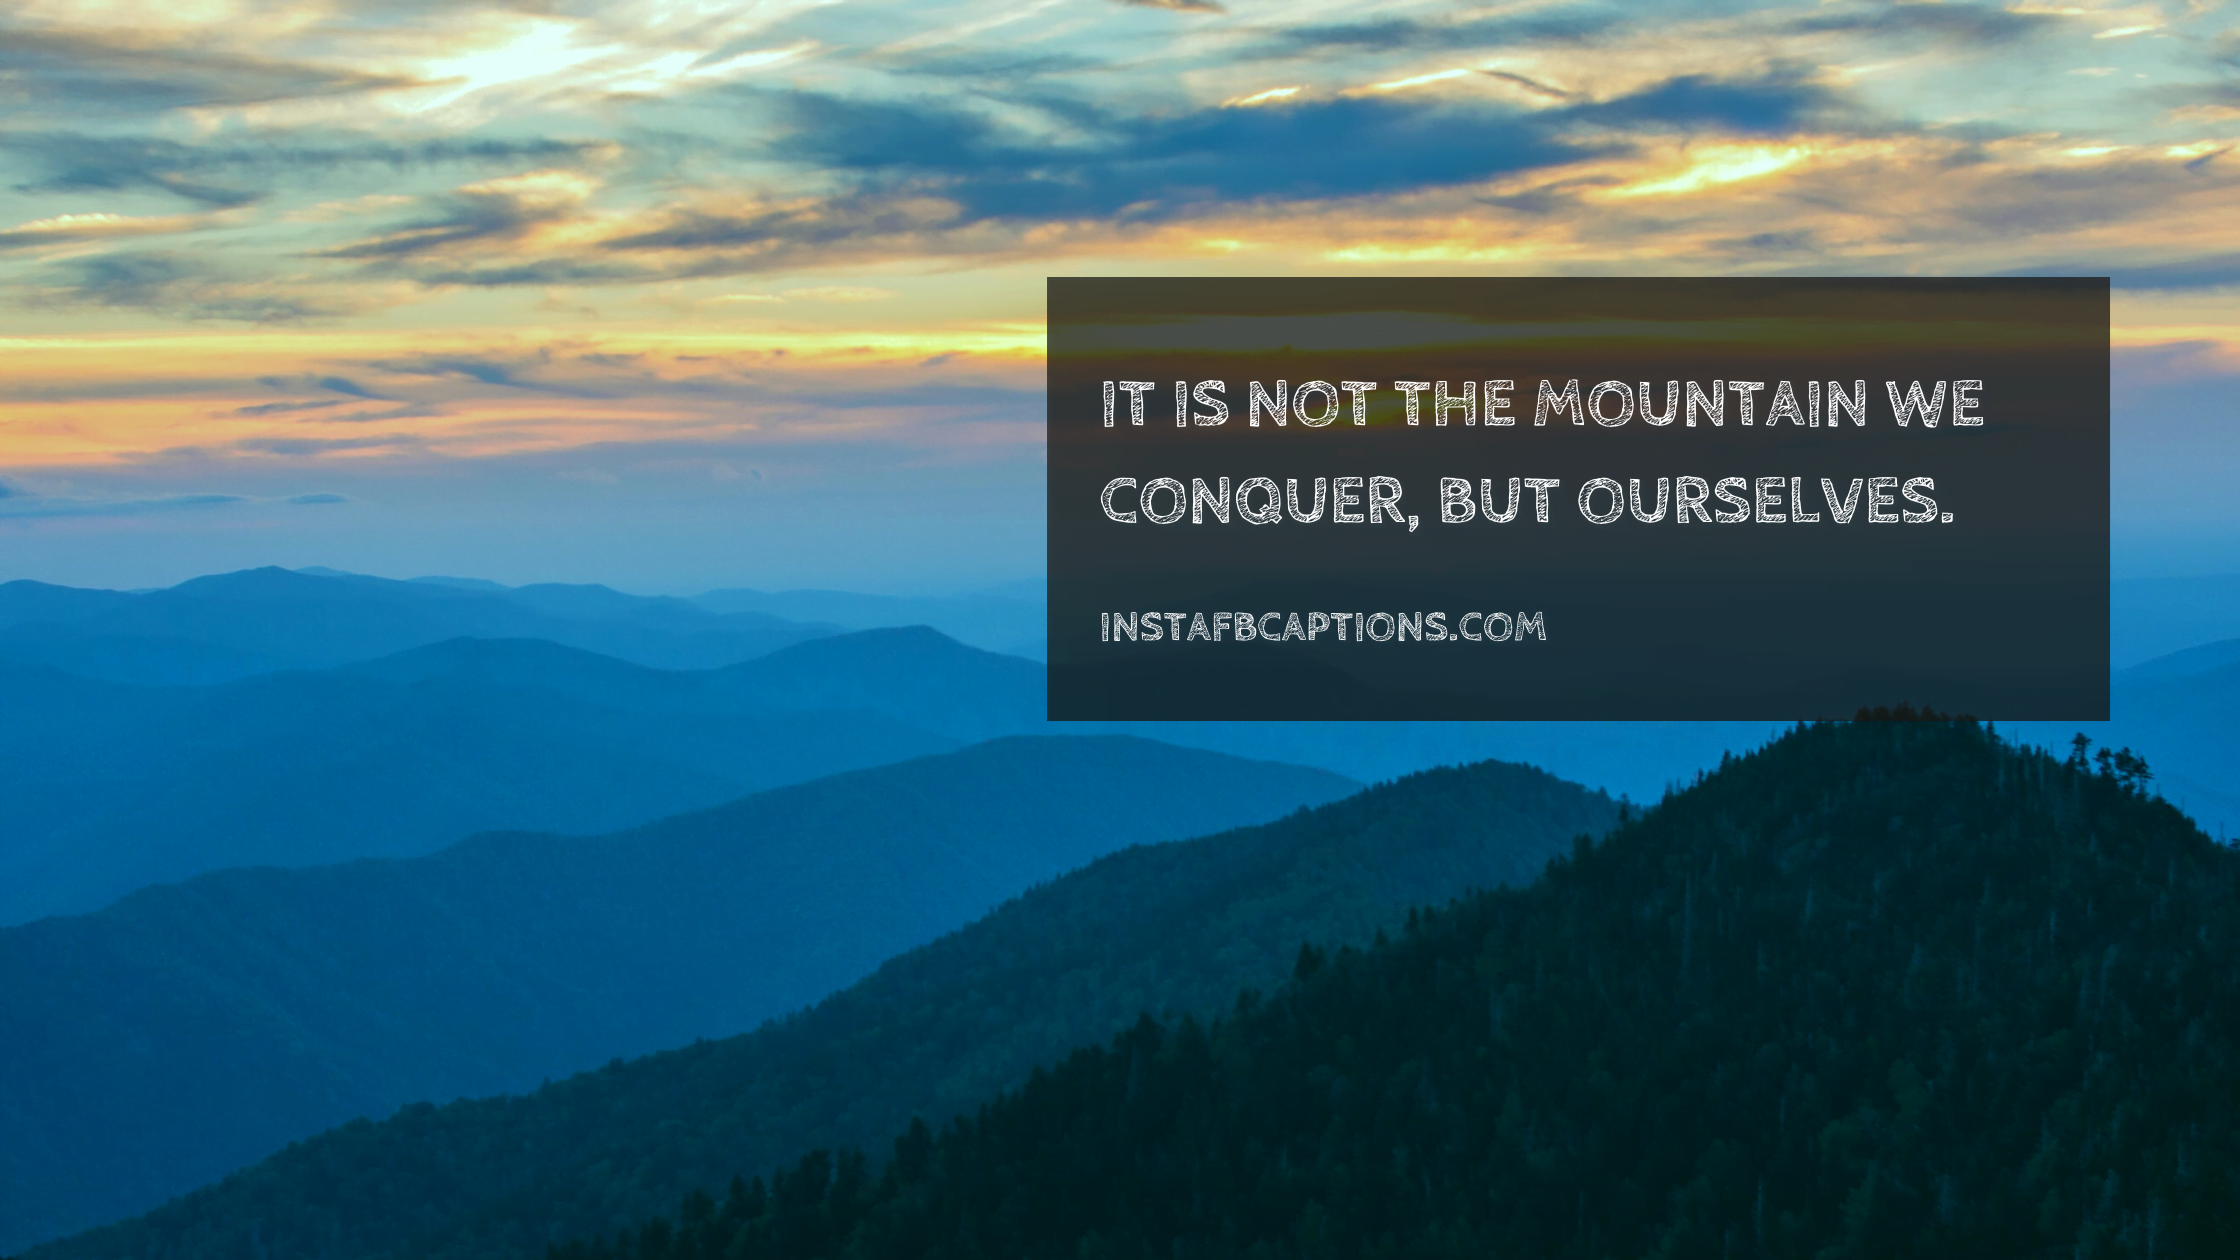 Pinterest Great Smoky Mountains Instagram Captions  - Pinterest Great Smoky Mountains Instagram Captions  - 97 Instagram Captions for Smoky Mountains Pictures in 2022